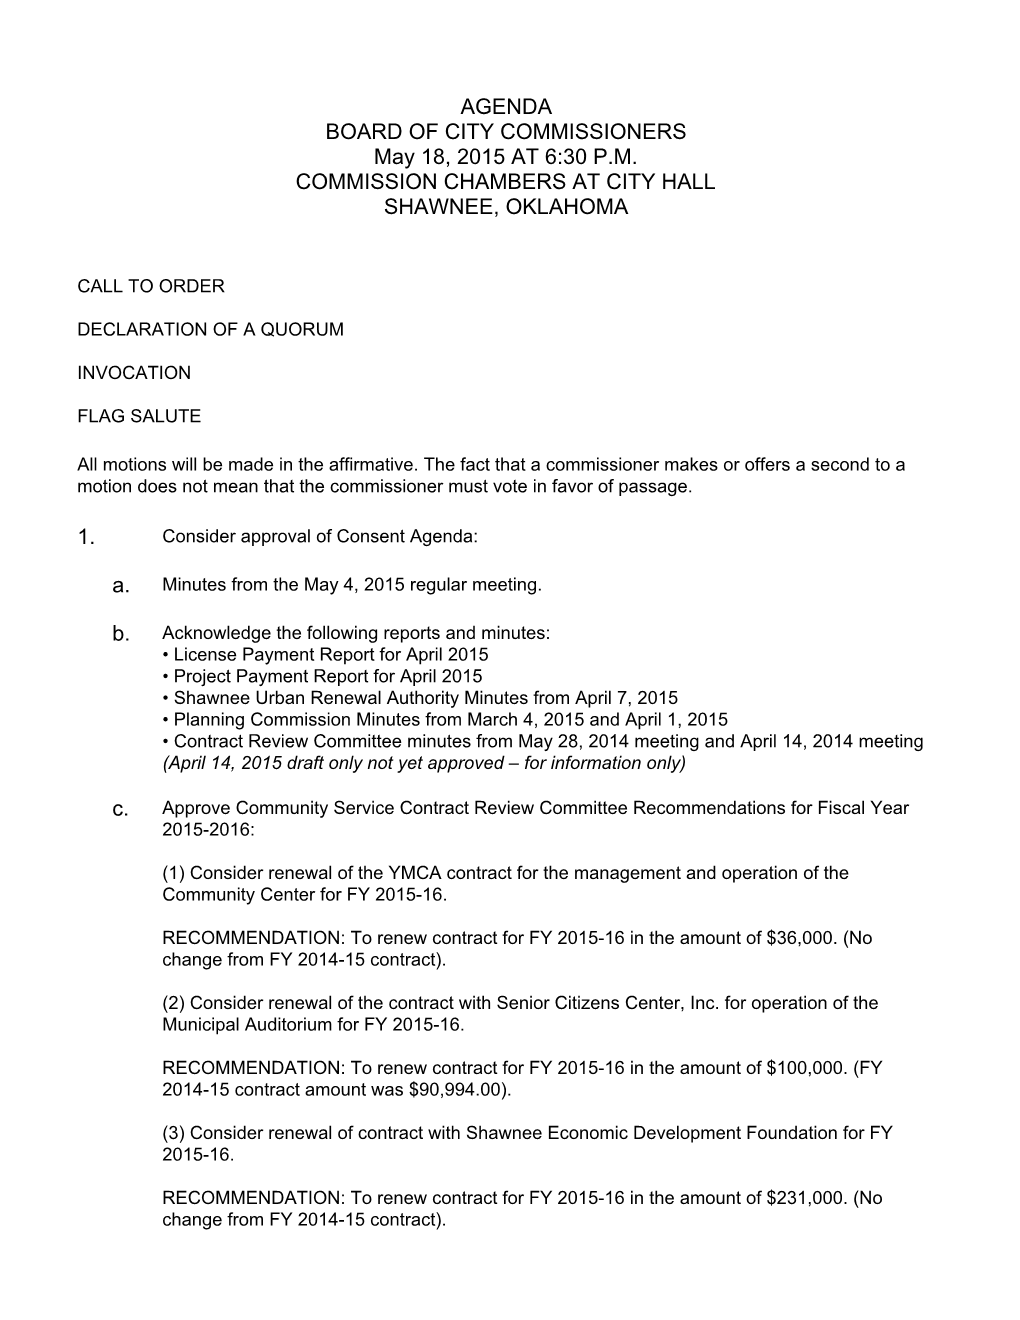 AGENDA BOARD of CITY COMMISSIONERS May 18, 2015 at 6:30 P.M. COMMISSION CHAMBERS at CITY HALL SHAWNEE, OKLAHOMA 1. A. B. C